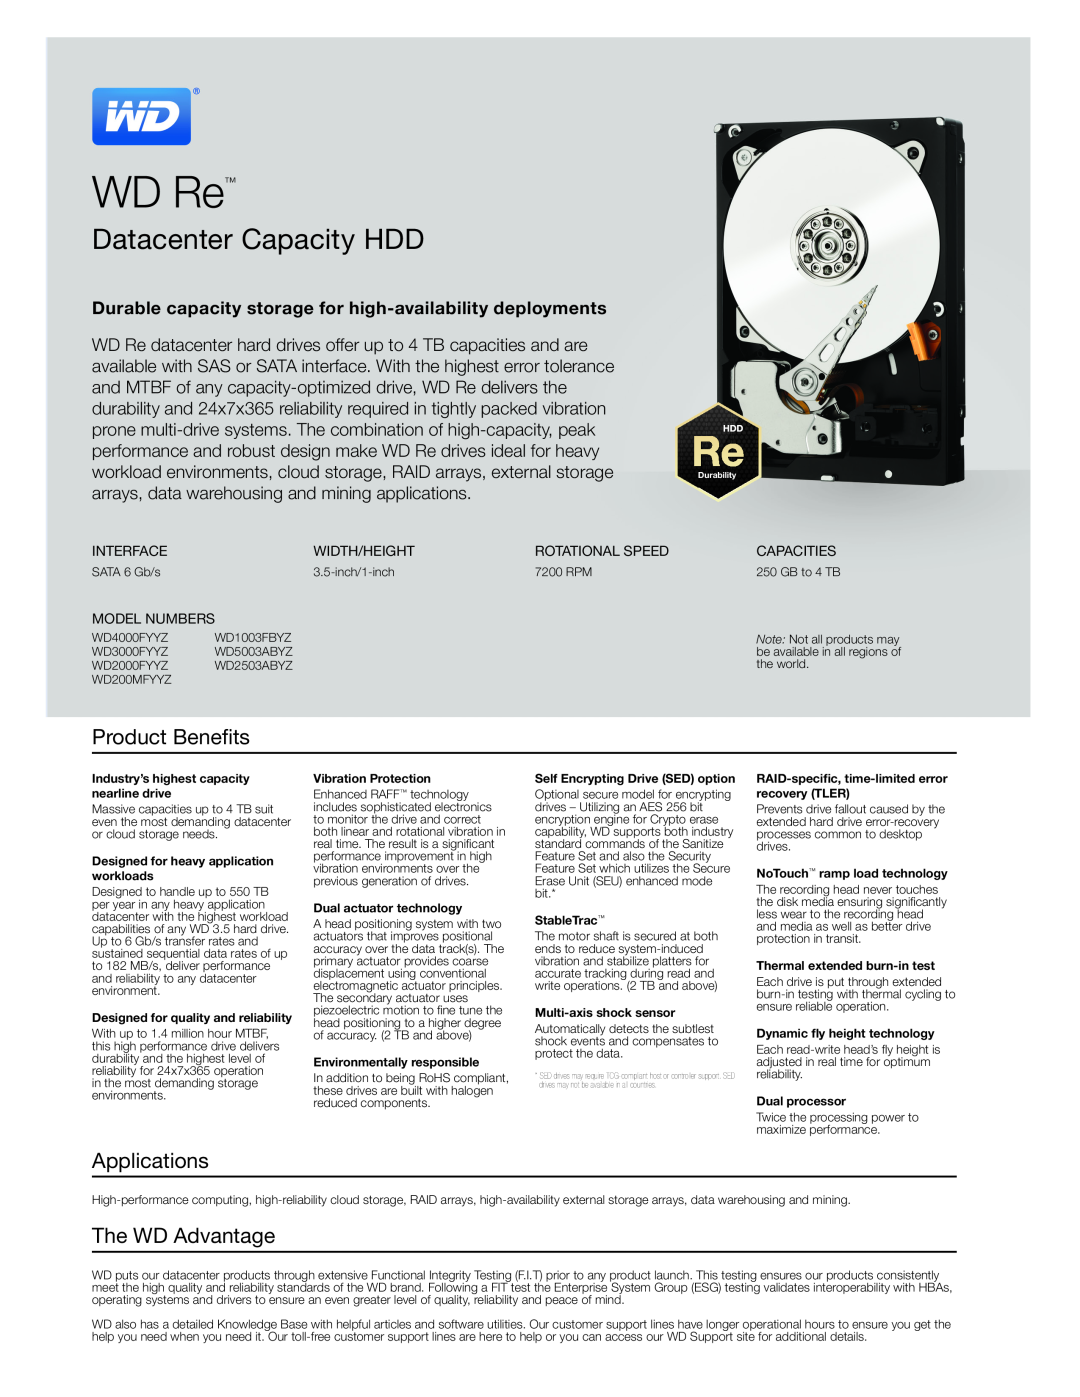 Western Digital WD4000FYYZ manual WD Re, Datacenter Capacity HDD, Product Benefits, Applications, The WD Advantage 